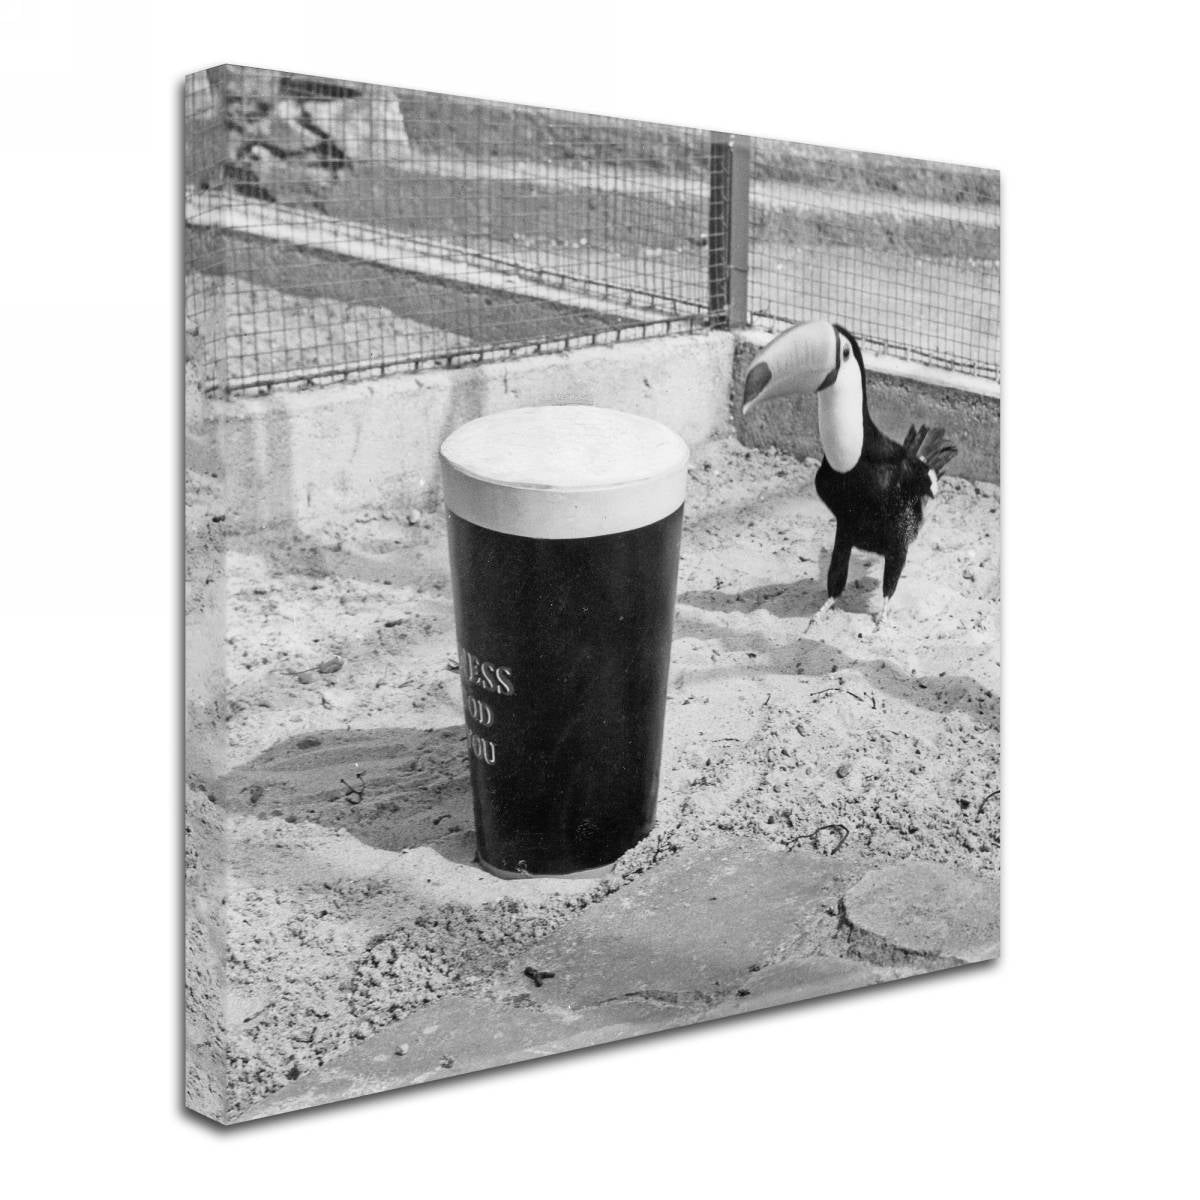 A vintage black and white photo of a toucan standing next to a Guinness Brewery 'Guinness XVII' Canvas Art.